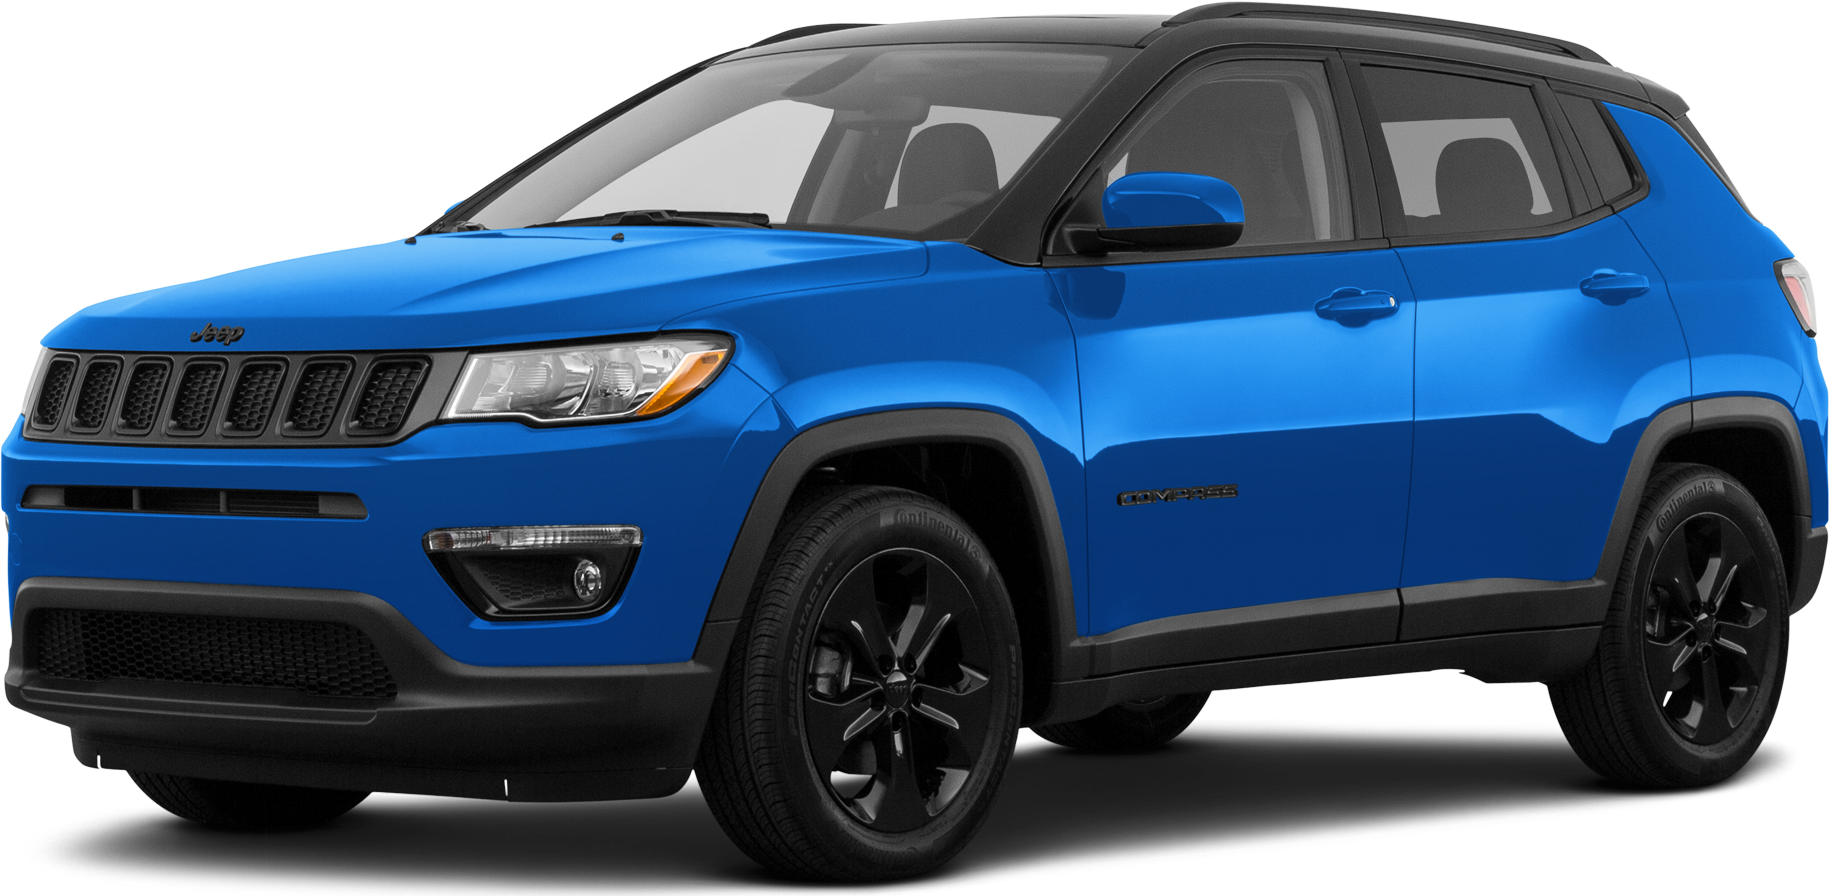 2021 Jeep Compass Price, Value, Ratings & Reviews